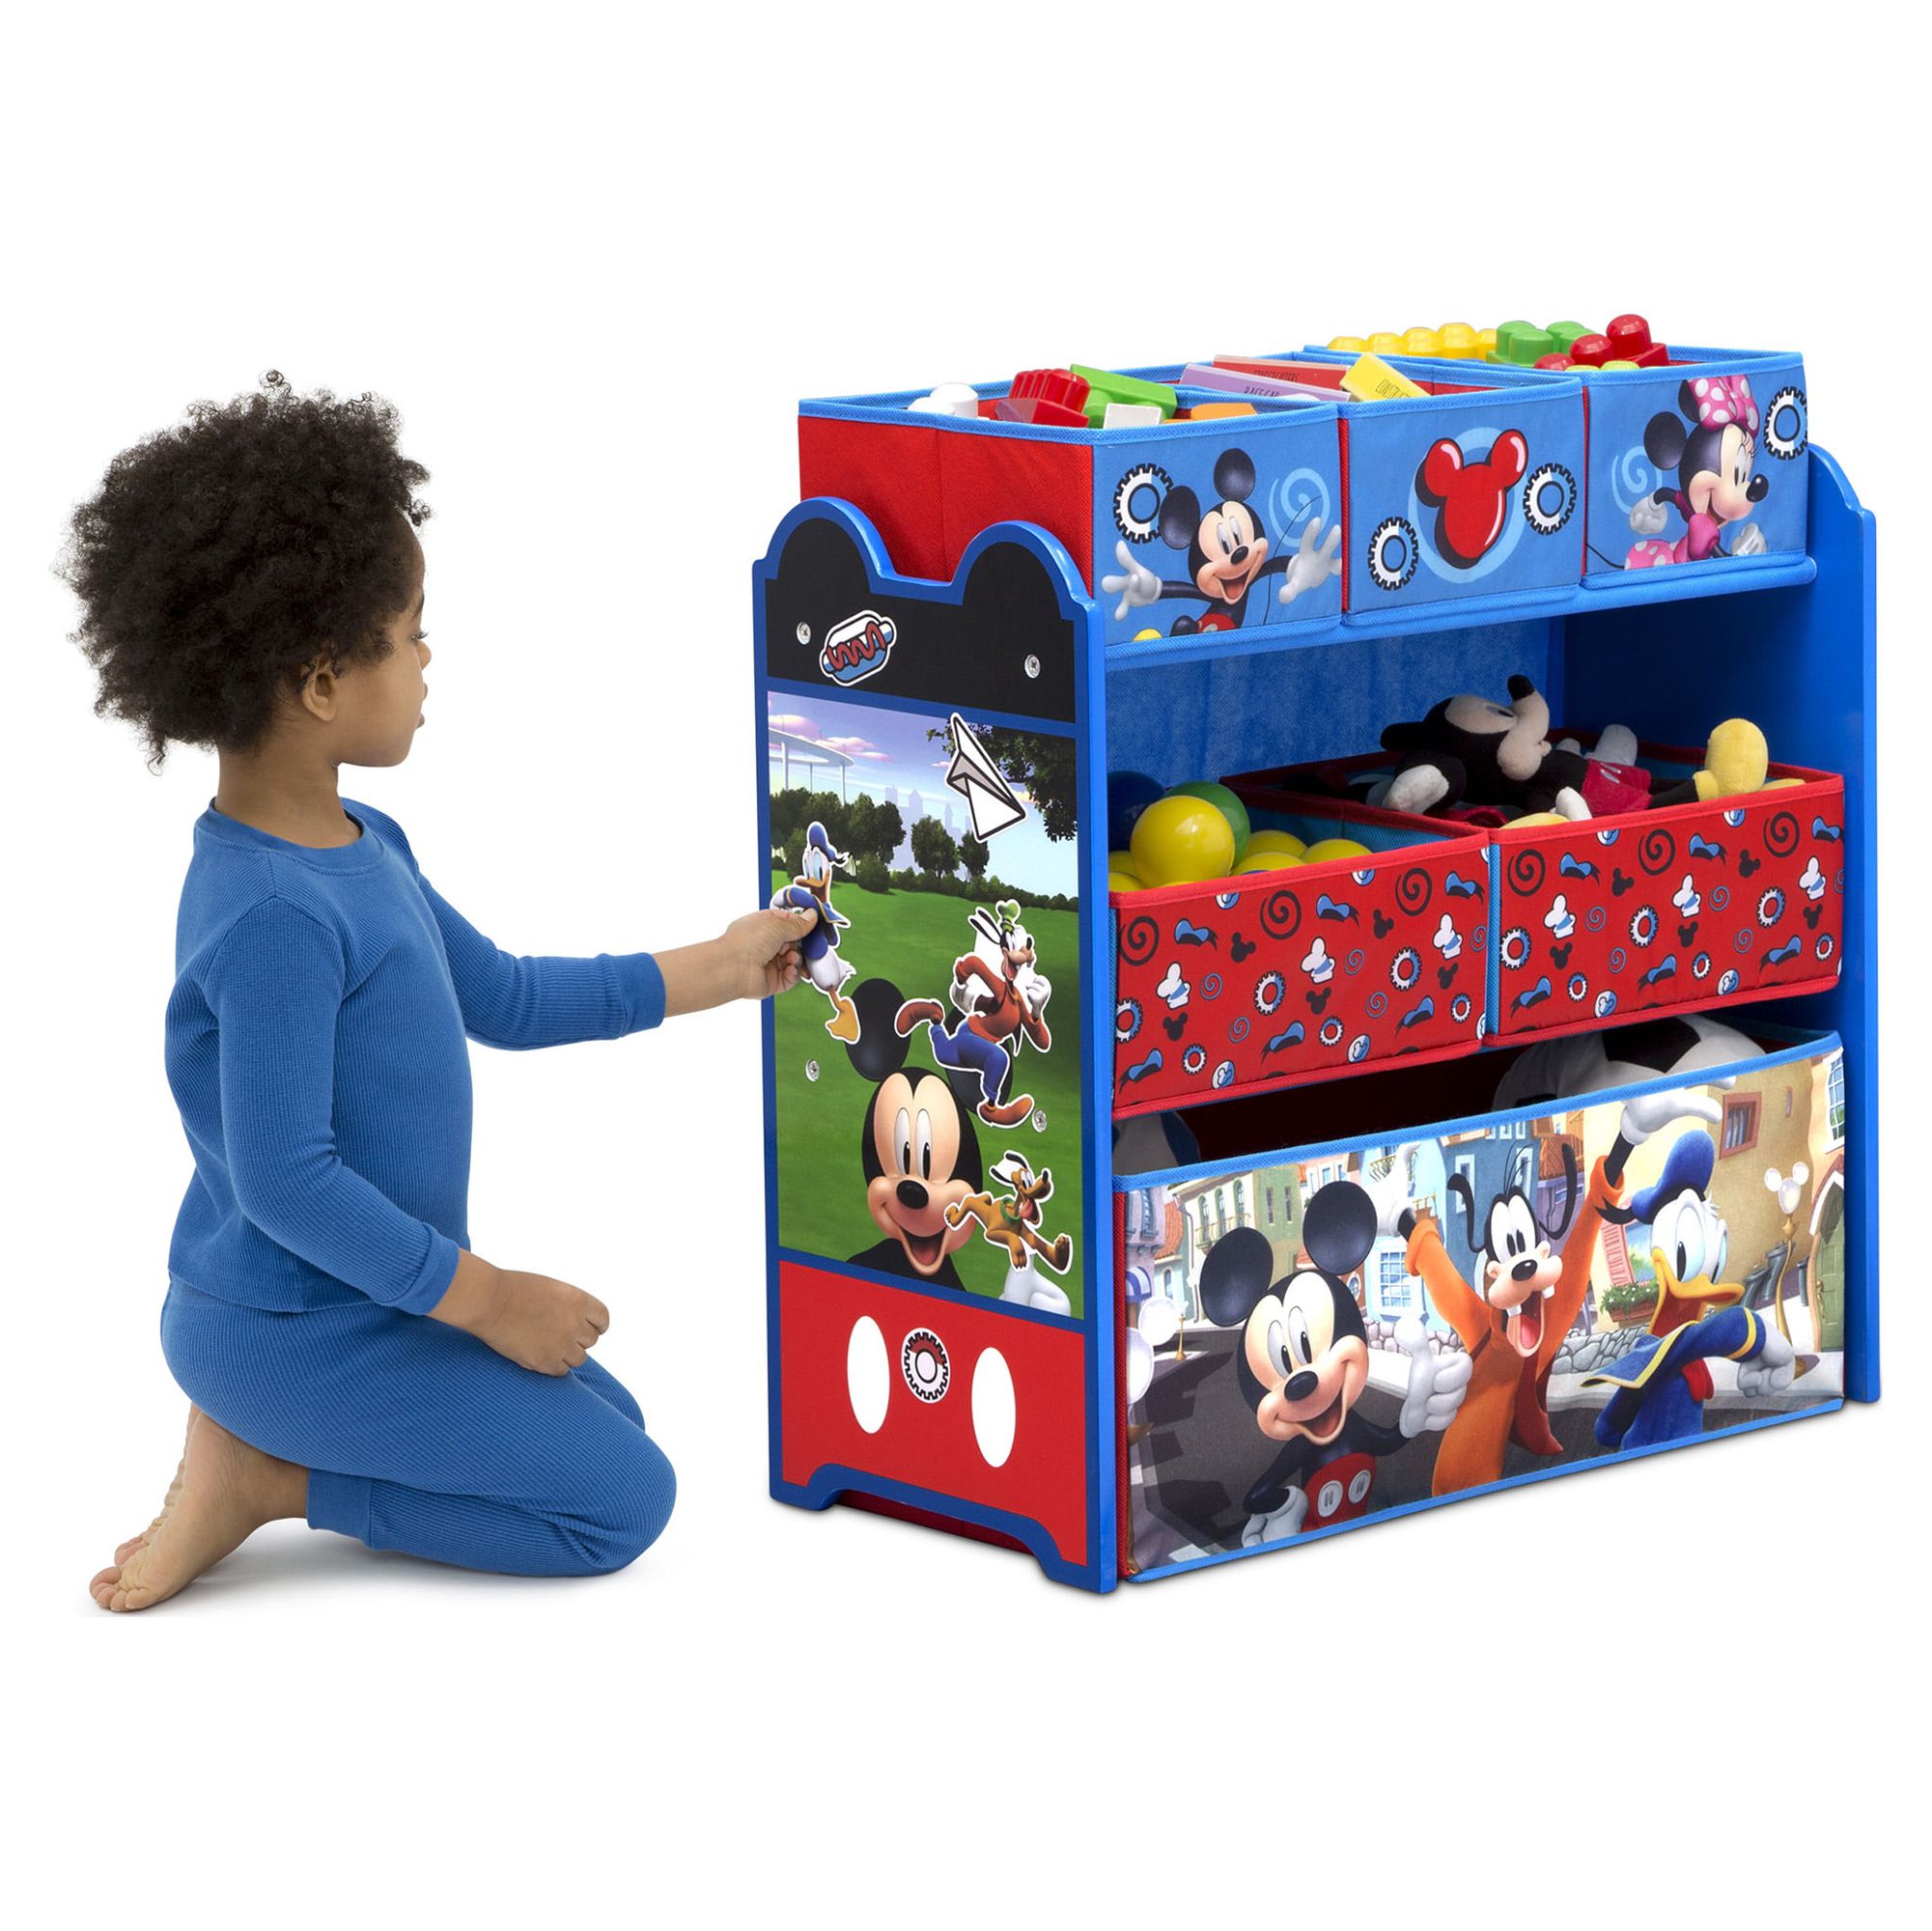 Disney Mickey Mouse 4-Piece Room-in-a-Box - Toddler Bedroom Set - image 13 of 20